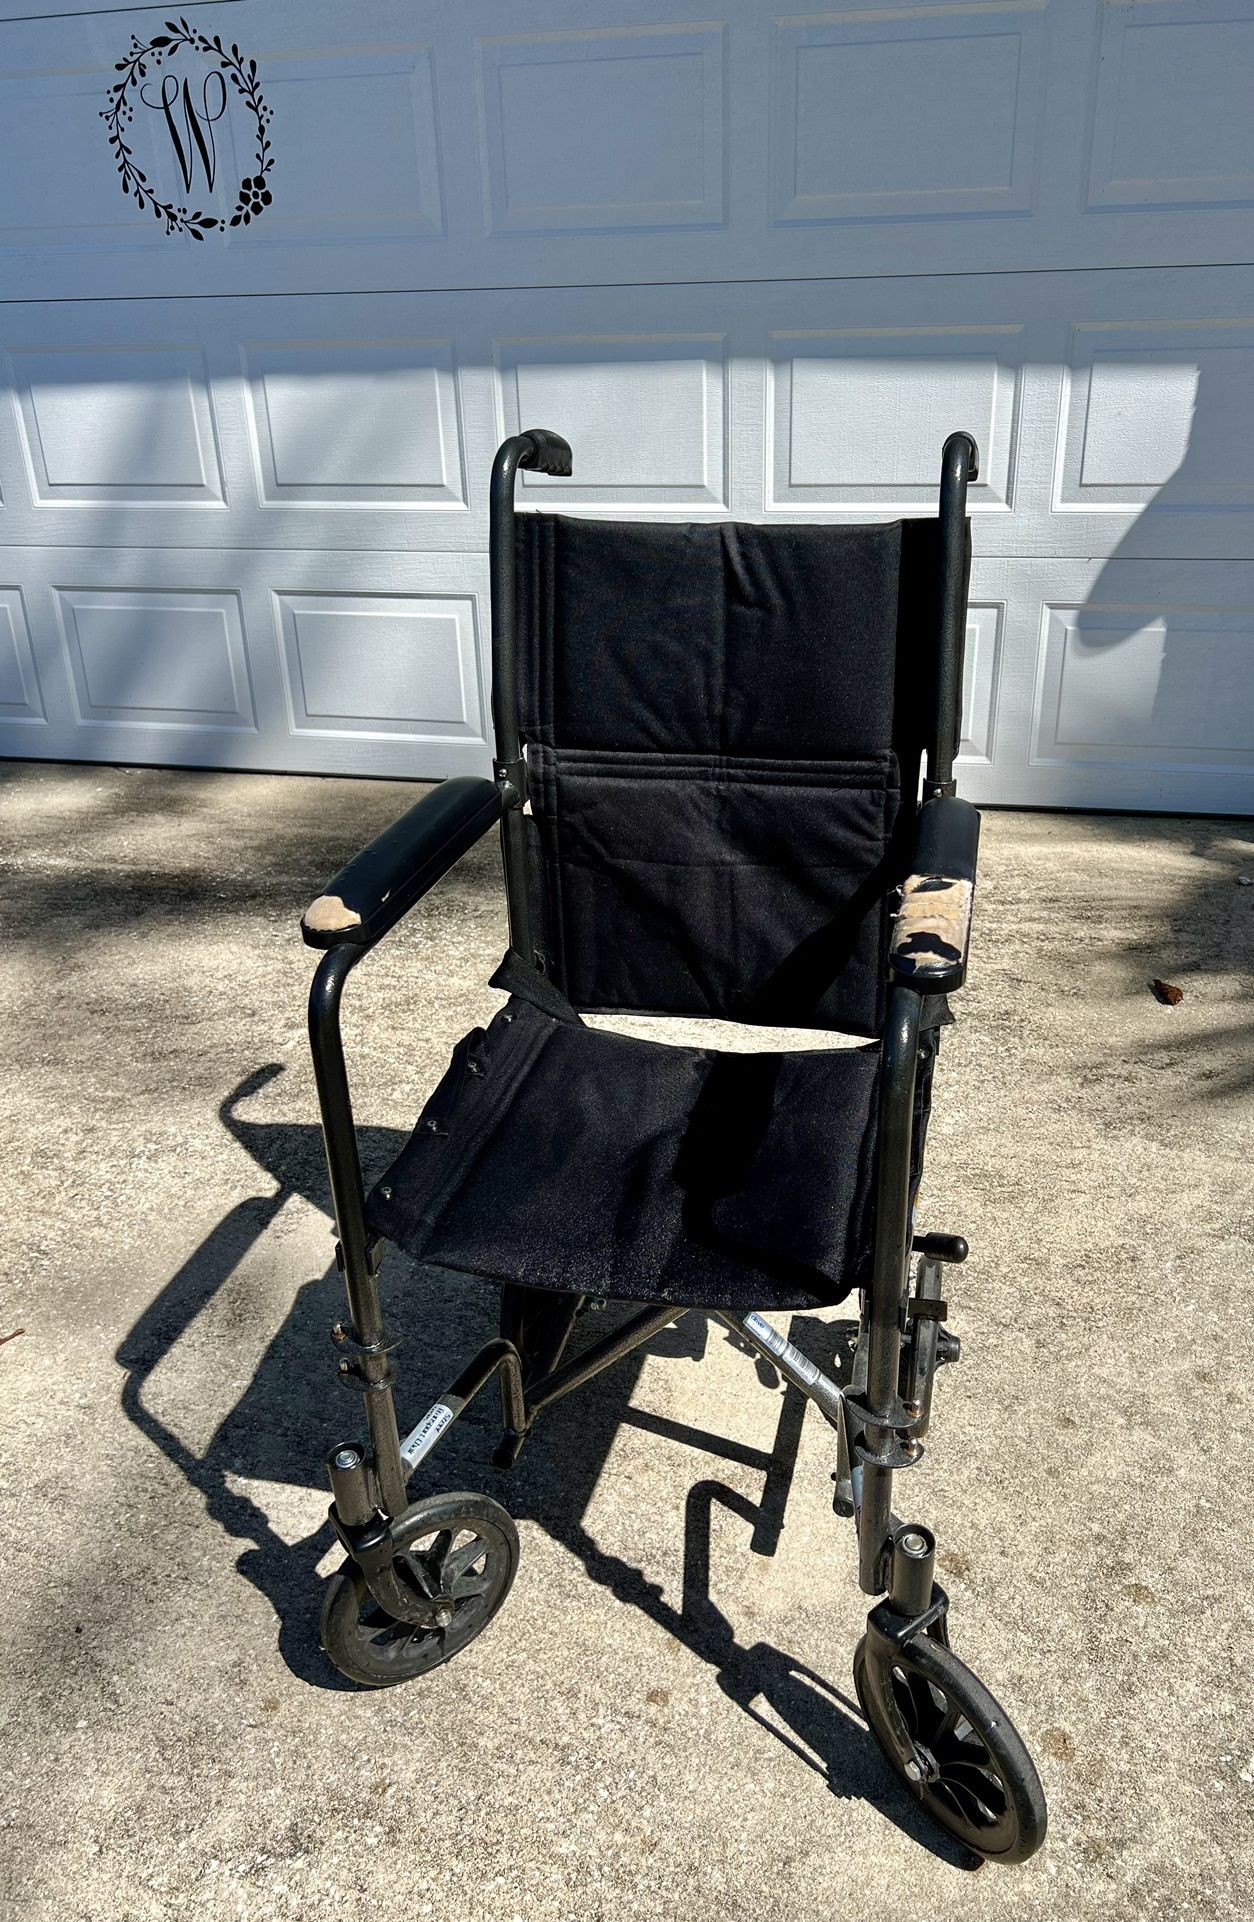 Wheelchair / Transport Chair- Clean and Good Working Condition